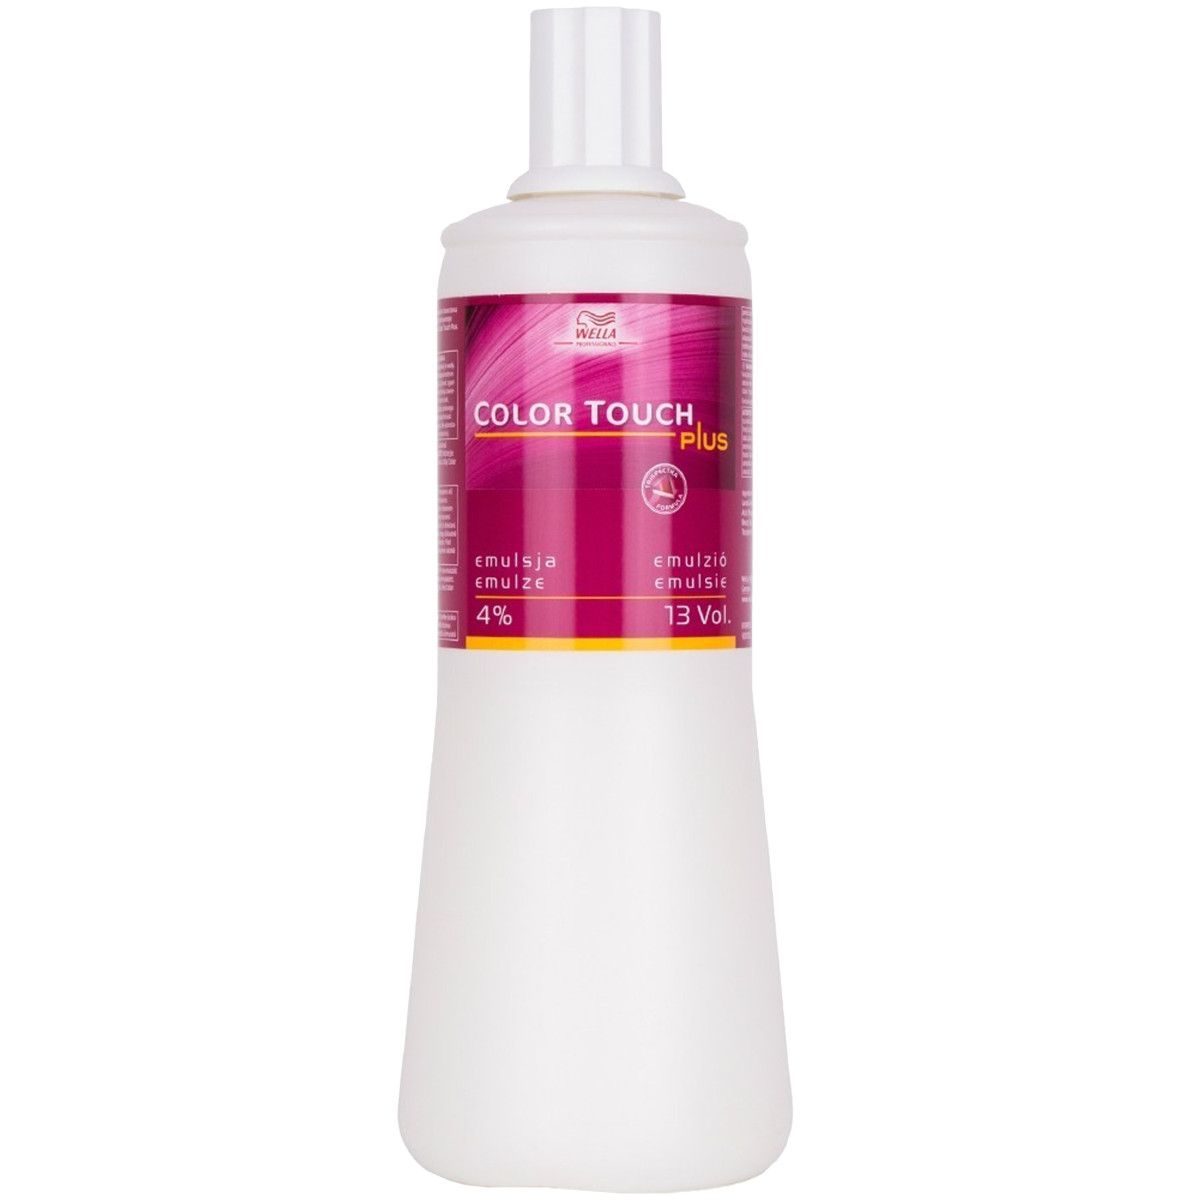 WELLA COLOR TOUCH PLUS, Emulsja do farby 1000ml